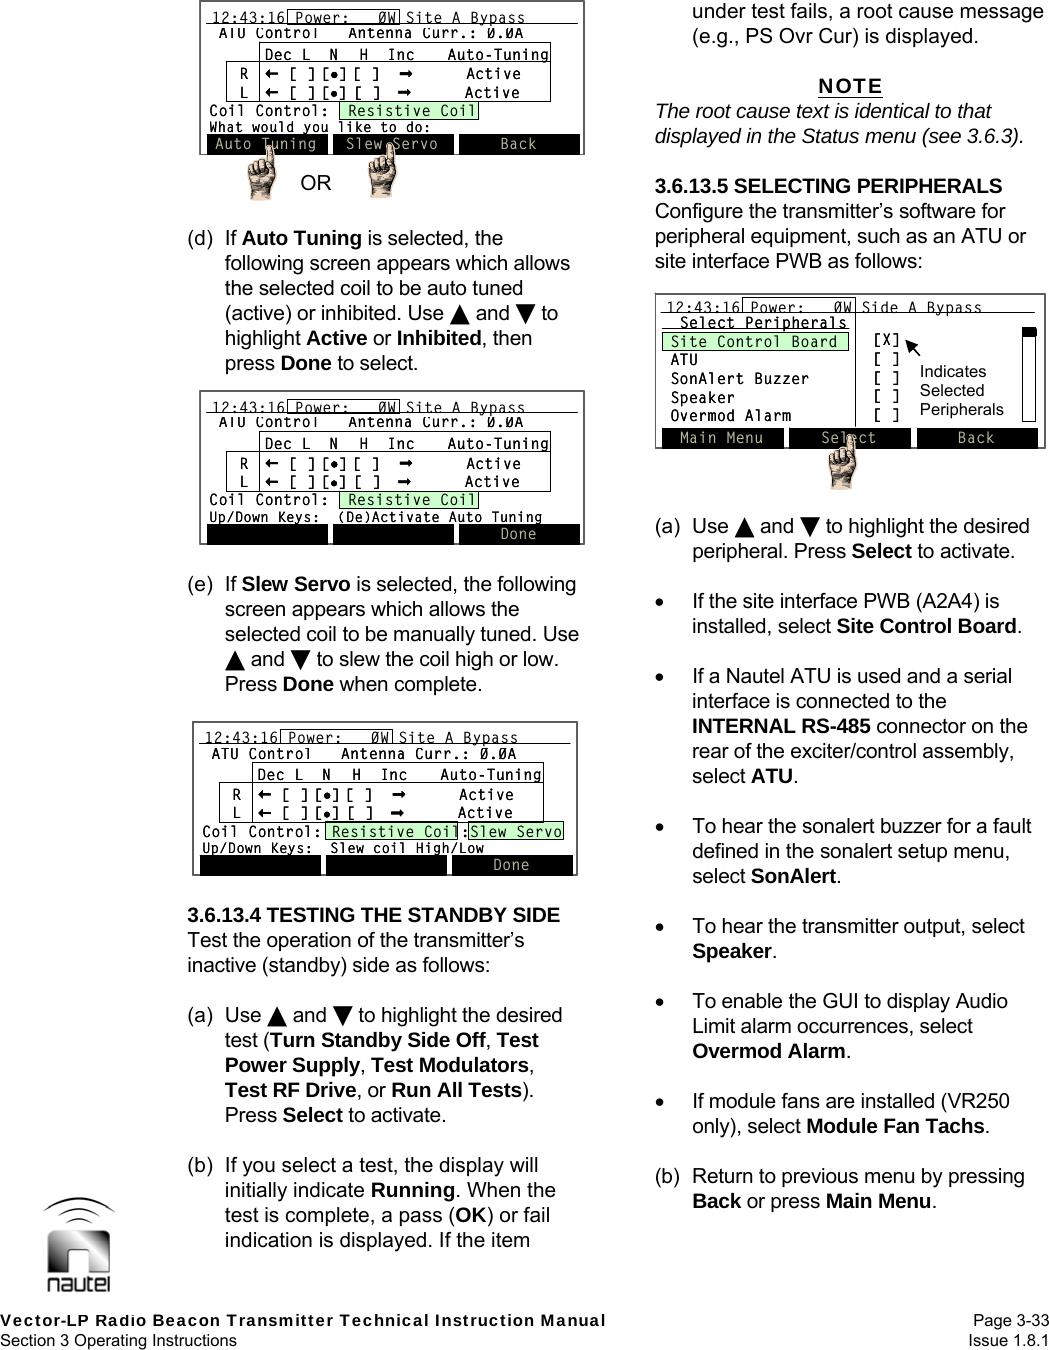   Vector-LP Radio Beacon Transmitter Technical Instruction Manual Page 3-33 Section 3 Operating Instructions  Issue 1.8.1 ATU Control Antenna Curr.: 0.0ADec L  N  H  Inc Auto-TuningR[ ] [][ ]  ActiveL[ ] [][ ] ActiveCoil Control:  Resistive CoilWhat would you like to do:12:43:16 Power:   0W Site A BypassAuto Tuning Slew Servo BackATU Control Antenna Curr.: 0.0ADec L  N  H  Inc Auto-TuningR[ ] [][ ]  ActiveL[ ] [][ ] ActiveCoil Control:  Resistive CoilWhat would you like to do:12:43:16 Power:   0W Site A Bypass12:43:16 Power:   0W Site A BypassAuto Tuning Slew Servo BackOR  (d) If Auto Tuning is selected, the following screen appears which allows the selected coil to be auto tuned (active) or inhibited. Use  and  to highlight Active or Inhibited, then press Done to select.  (e) If Slew Servo is selected, the following screen appears which allows the selected coil to be manually tuned. Use  and  to slew the coil high or low. Press Done when complete.  3.6.13.4 TESTING THE STANDBY SIDE Test the operation of the transmitter’s inactive (standby) side as follows:  (a) Use  and  to highlight the desired test (Turn Standby Side Off, Test Power Supply, Test Modulators, Test RF Drive, or Run All Tests). Press Select to activate.  (b)  If you select a test, the display will initially indicate Running. When the test is complete, a pass (OK) or fail indication is displayed. If the item under test fails, a root cause message (e.g., PS Ovr Cur) is displayed.  NOTE The root cause text is identical to that displayed in the Status menu (see 3.6.3).  3.6.13.5 SELECTING PERIPHERALS Configure the transmitter’s software for peripheral equipment, such as an ATU or site interface PWB as follows:  (a) Use  and  to highlight the desired peripheral. Press Select to activate.    If the site interface PWB (A2A4) is installed, select Site Control Board.    If a Nautel ATU is used and a serial interface is connected to the INTERNAL RS-485 connector on the rear of the exciter/control assembly, select ATU.    To hear the sonalert buzzer for a fault defined in the sonalert setup menu, select SonAlert.    To hear the transmitter output, select Speaker.    To enable the GUI to display Audio Limit alarm occurrences, select Overmod Alarm.    If module fans are installed (VR250 only), select Module Fan Tachs.  (b)  Return to previous menu by pressing Back or press Main Menu.  ATU Control Antenna Curr.: 0.0ADec L  N  H  Inc Auto-TuningR[ ] [][ ]  ActiveL[ ] [][ ] ActiveCoil Control: Resistive Coil:Slew ServoUp/Down Keys:  Slew coil High/Low12:43:16 Power:   0W Site A BypassDoneATU Control Antenna Curr.: 0.0ADec L  N  H  Inc Auto-TuningR[ ] [][ ]  ActiveL[ ] [][ ] ActiveCoil Control: Resistive Coil:Slew ServoUp/Down Keys:  Slew coil High/Low12:43:16 Power:   0W Site A Bypass12:43:16 Power:   0W Site A BypassDoneATU Control Antenna Curr.: 0.0ADec L  N  H  Inc Auto-TuningR[ ] [][ ]  ActiveL[ ] [][ ] ActiveCoil Control:  Resistive CoilUp/Down Keys:  (De)Activate Auto Tuning12:43:16 Power:   0W Site A BypassDoneATU Control Antenna Curr.: 0.0ADec L  N  H  Inc Auto-TuningR[ ] [][ ]  ActiveL[ ] [][ ] ActiveCoil Control:  Resistive CoilUp/Down Keys:  (De)Activate Auto Tuning12:43:16 Power:   0W Site A Bypass12:43:16 Power:   0W Site A BypassDoneMain Menu Select Back12:43:16 Power:   0W Side A BypassSelect PeripheralsSite Control BoardATUSonAlert BuzzerSpeakerOvermod Alarm[X][ ][ ][ ][ ]Main Menu Select Back12:43:16 Power:   0W Side A Bypass12:43:16 Power:   0W Side A BypassSelect PeripheralsSite Control BoardATUSonAlert BuzzerSpeakerOvermod Alarm[X][ ][ ][ ][ ]Indicates Selected Peripherals